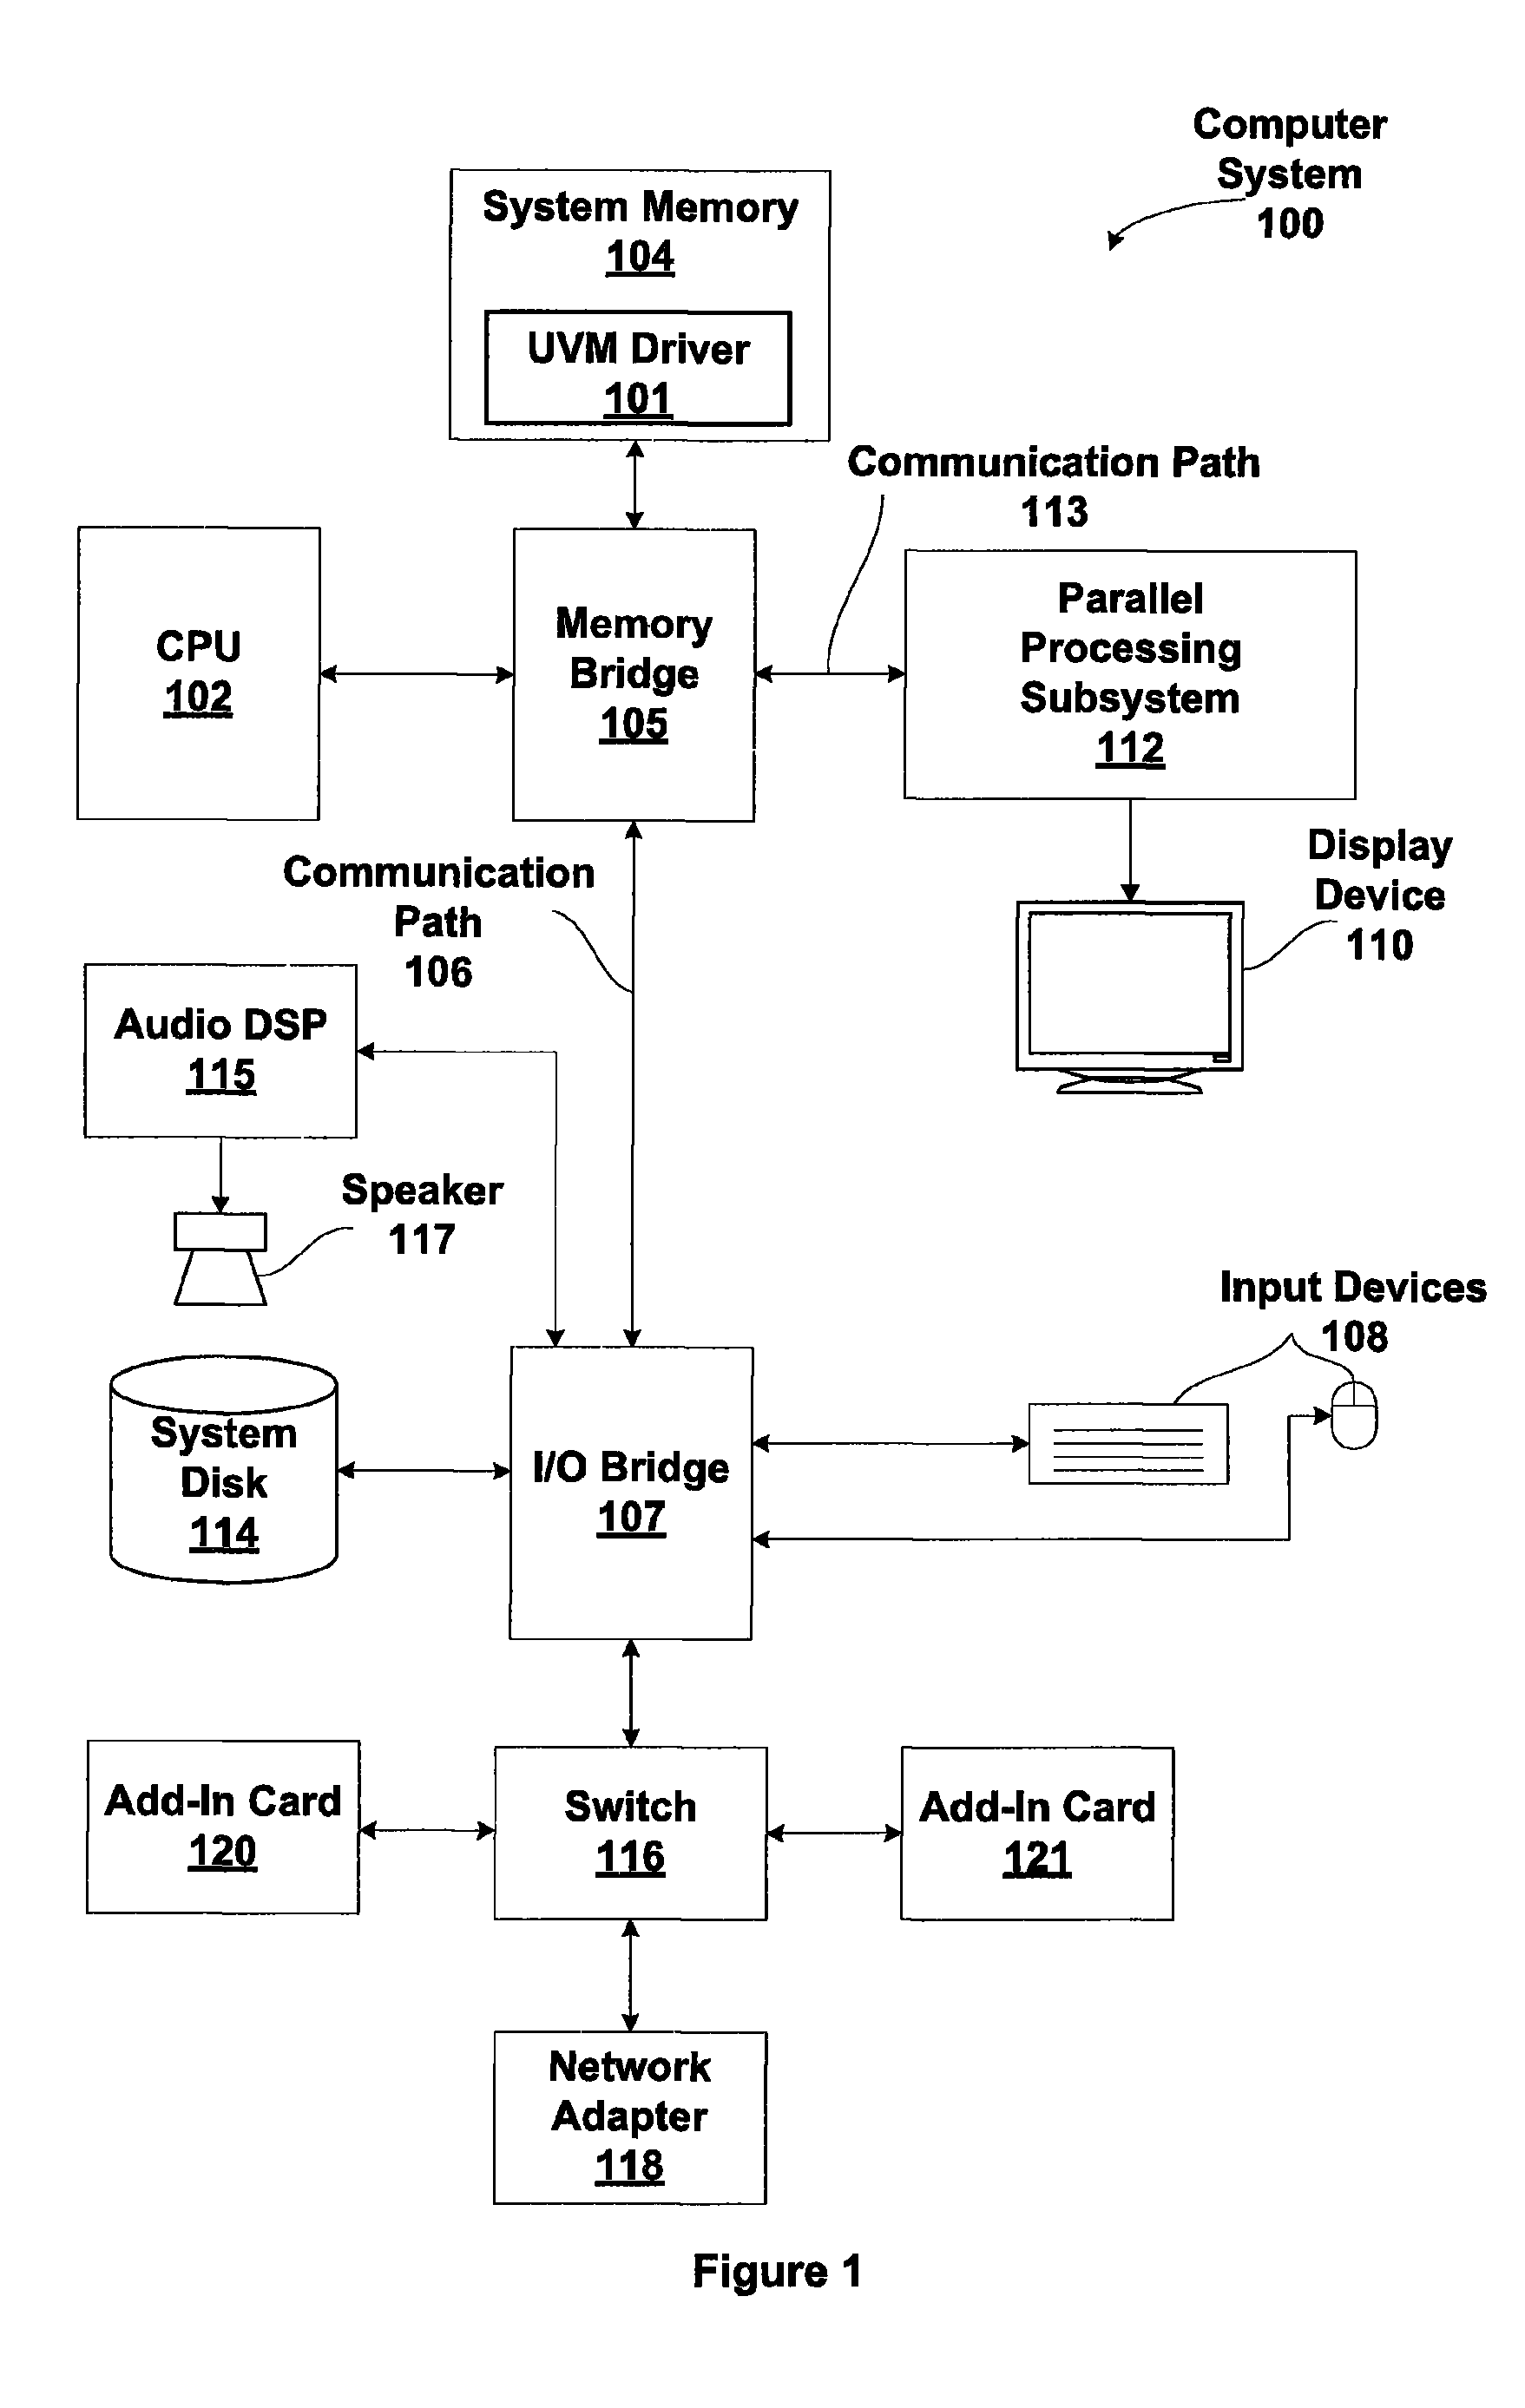 Ported enclosure and automated equalization of frequency response in a micro-speaker audio system